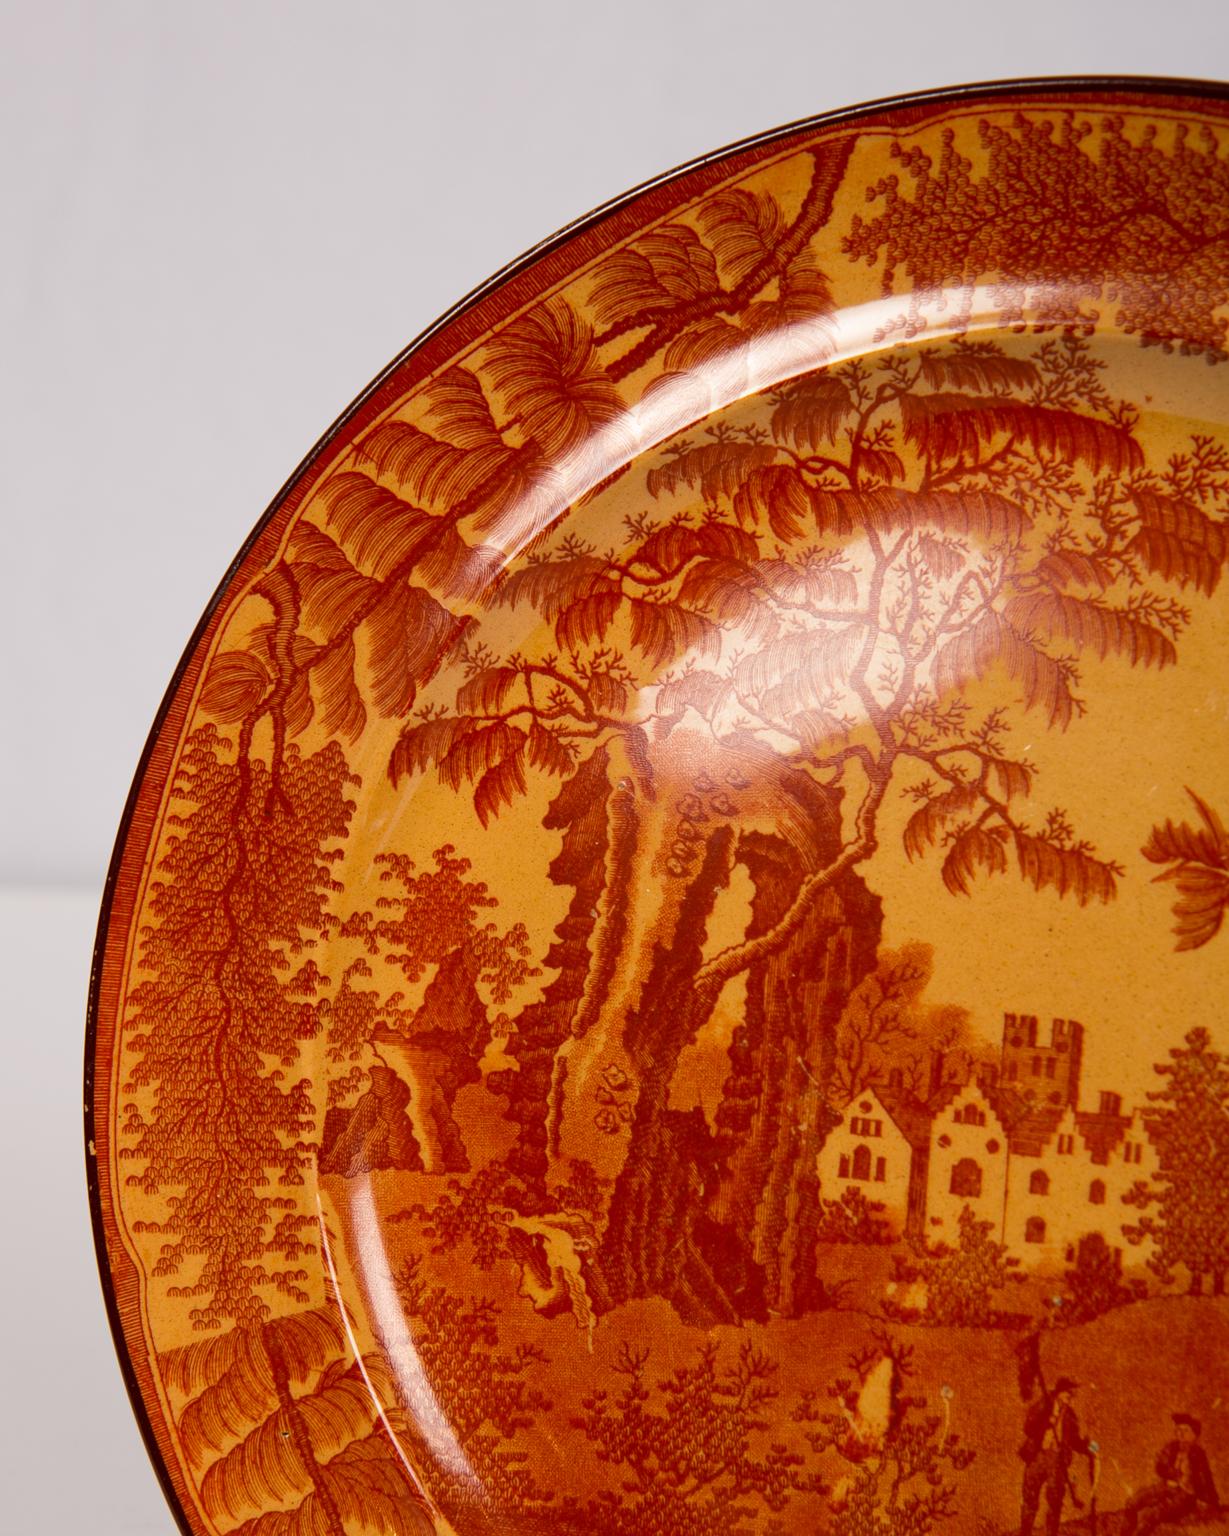 Two ‘Bisham Abbey’ Pattern dishes with rich, red printing on a chalcedony ground. Made by Davenport the dishes date from the early 19th century, circa 1810. The red transfer on the chalcedony ground is quite intense. The two dishes are a matching